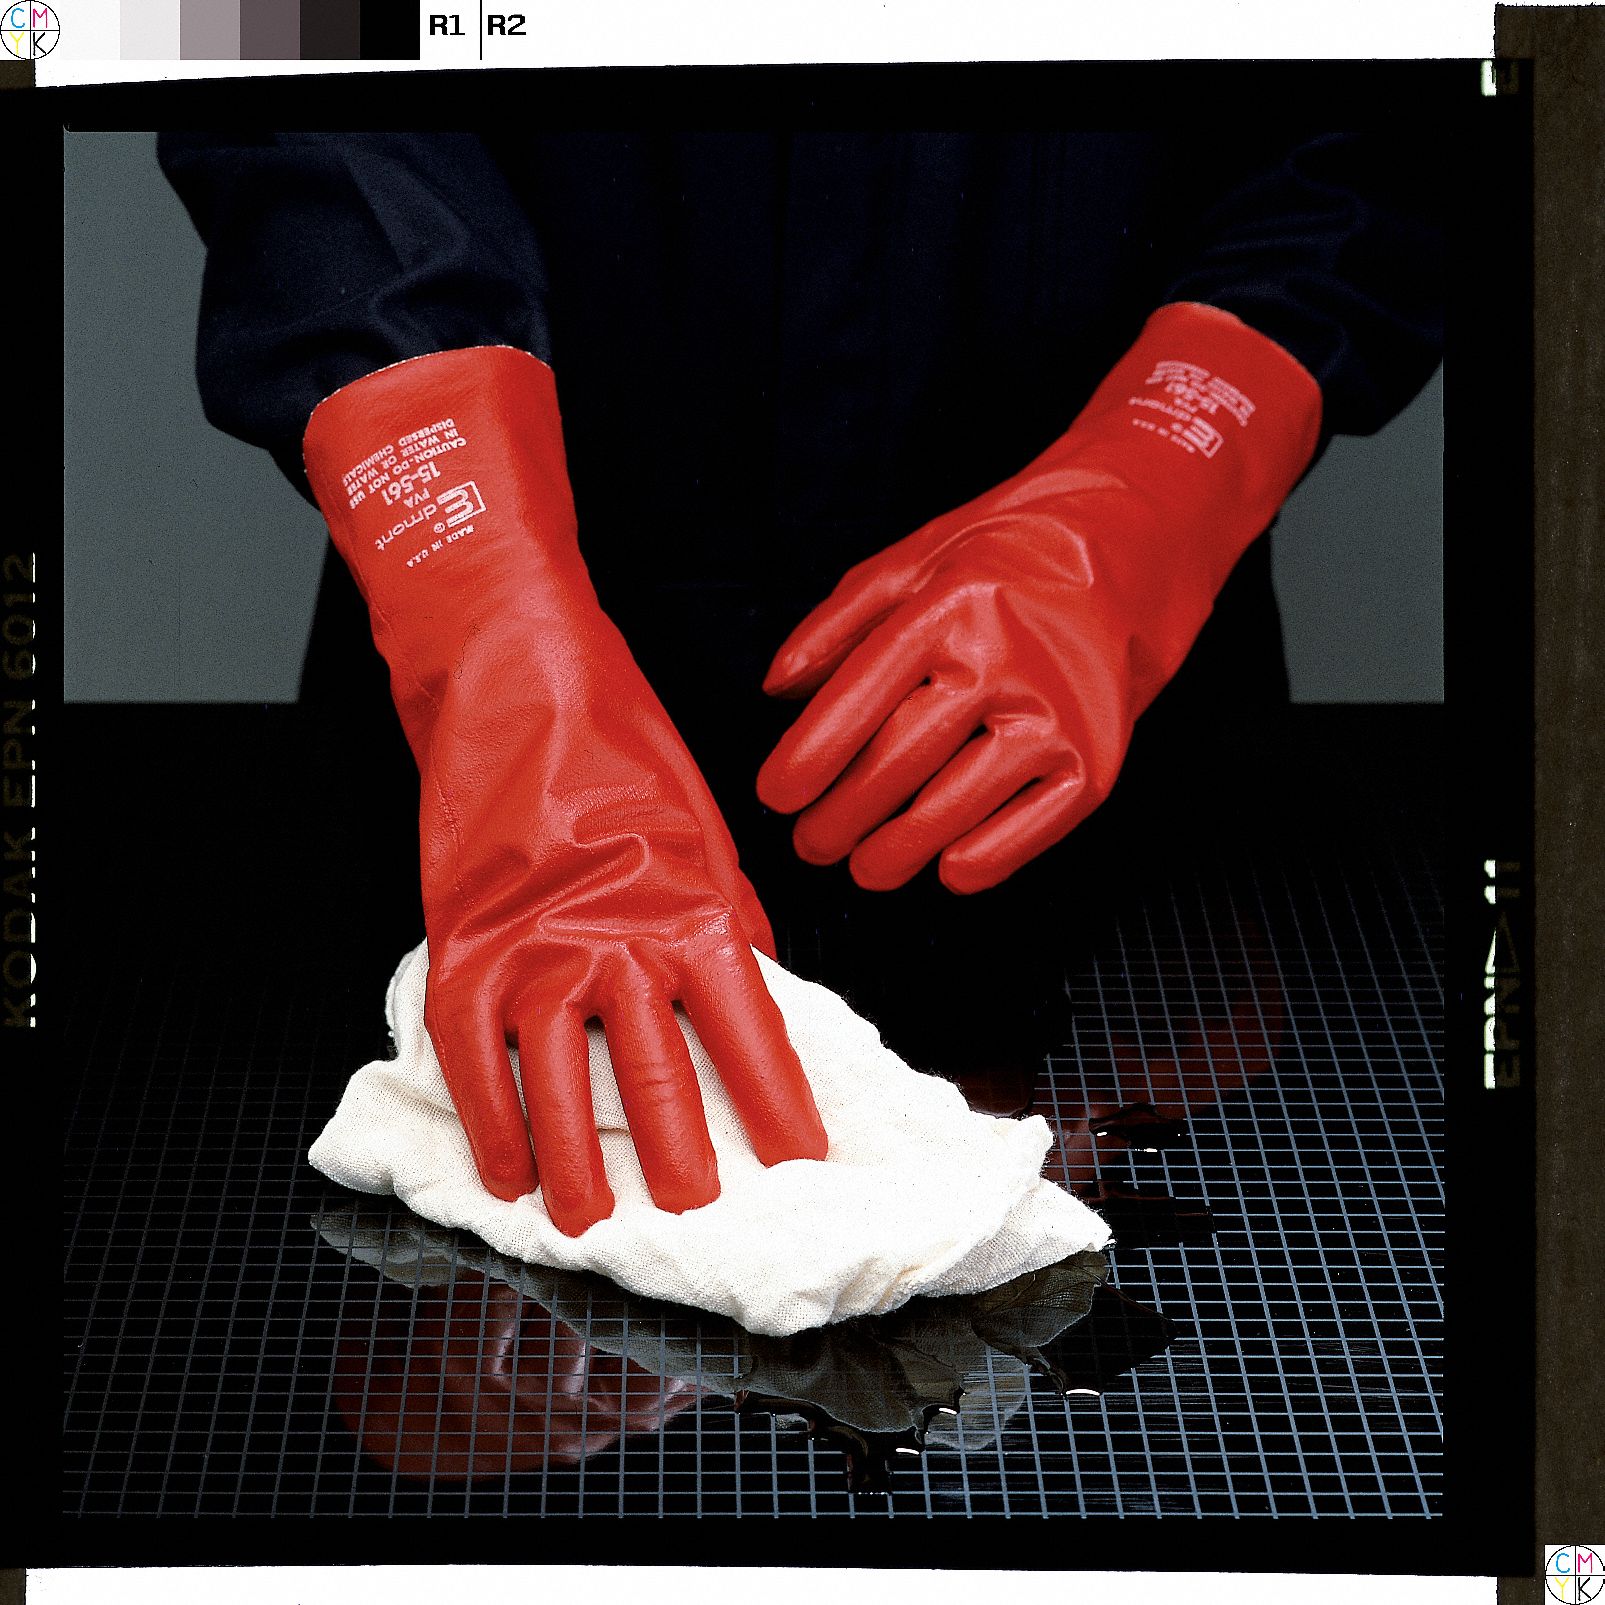 15 Length Size 10 13 Width Red Ansell 1555410 PVA 15554 Smooth Finish Poly Vinyl Alcohol Gloves 15 Length 13 Width 0.42 Height 15-554-10 Pack of 12 0.42 Height 